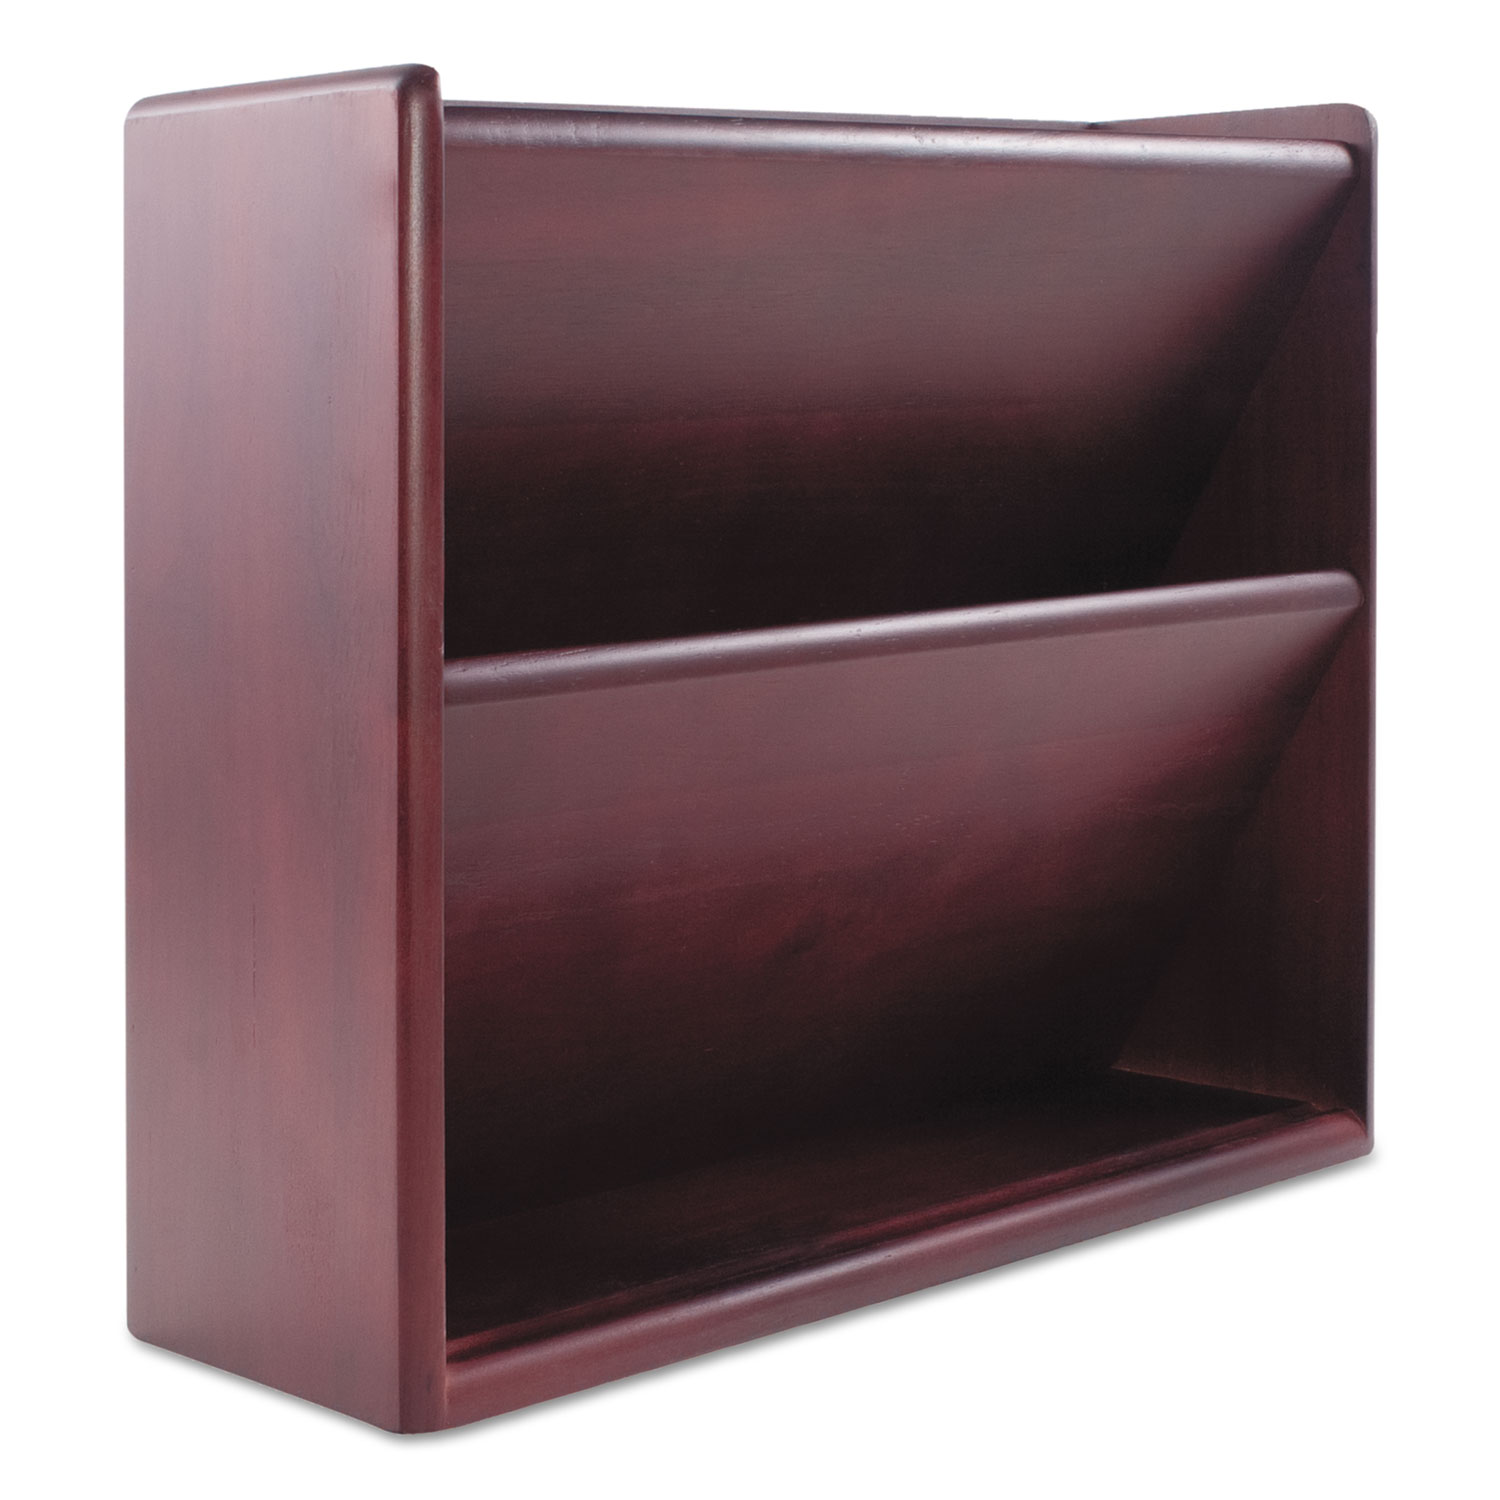  Carver CW09623 Hardwood Double Wall File, Letter, Two Pocket, Mahogany (CVR09623) 